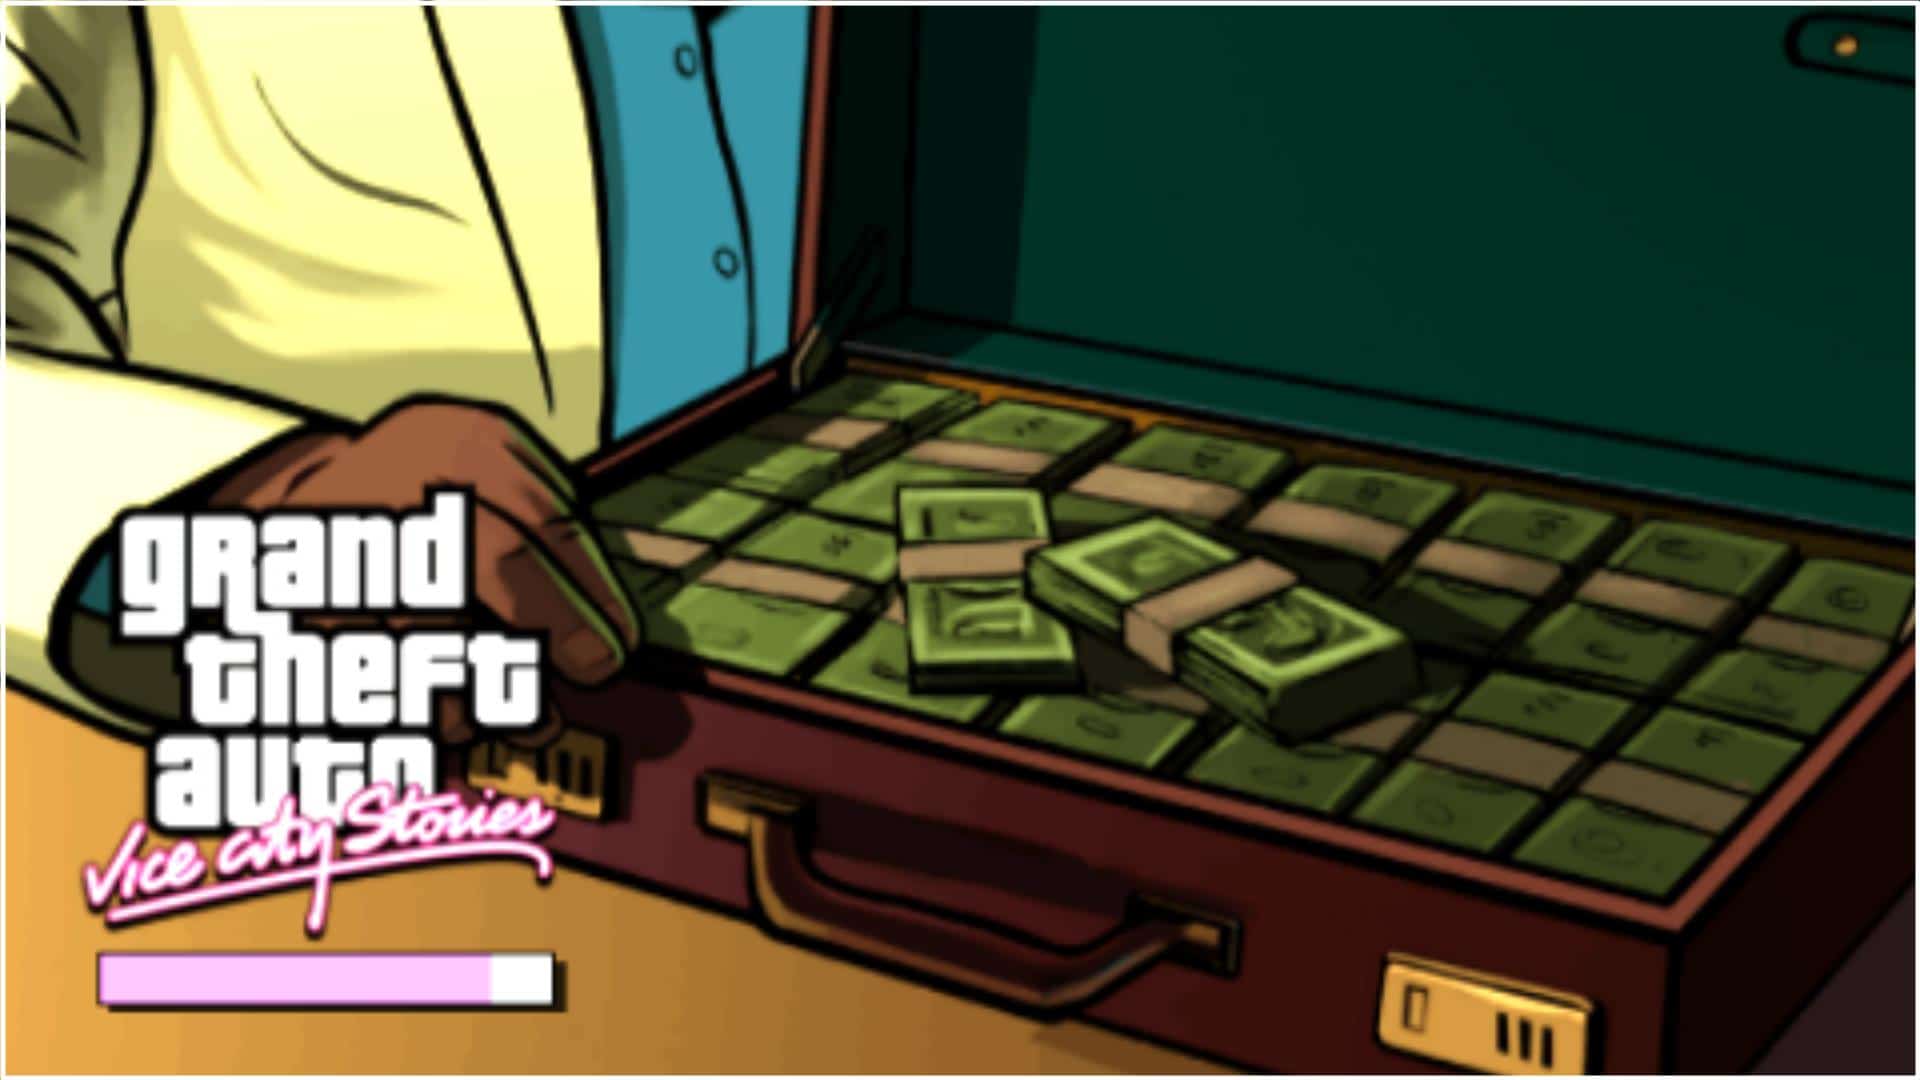 Grand Theft Auto - Vice City Stories ROM (ISO) Download for Sony